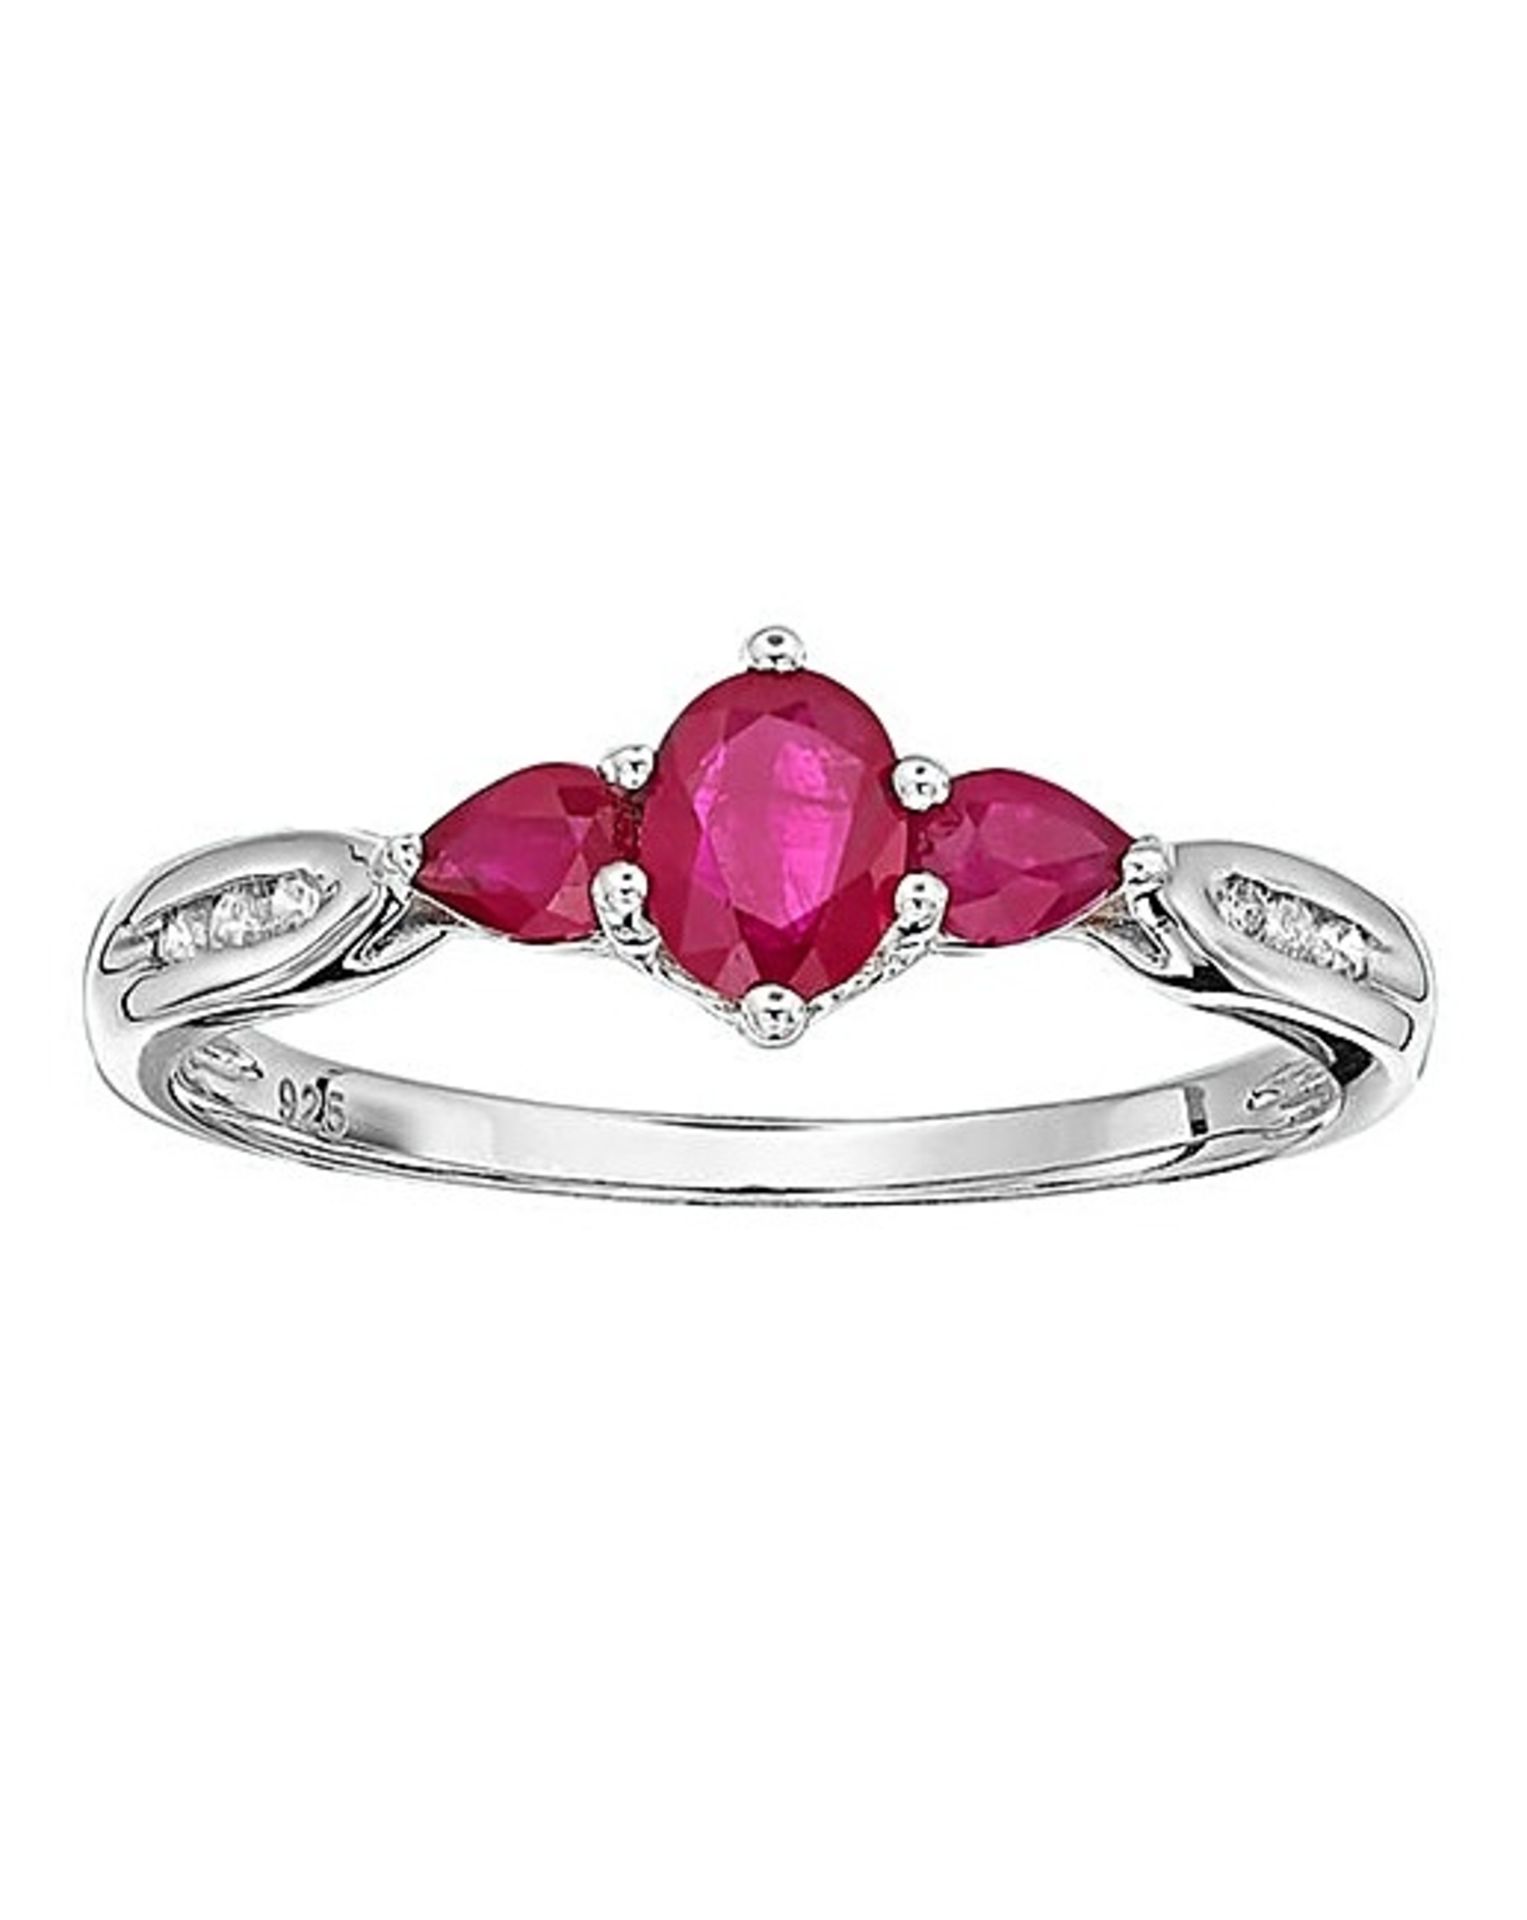 This stunning 925 Solid Sterling Silver ring set with Ruby & White Topaz is a beautiful piece of